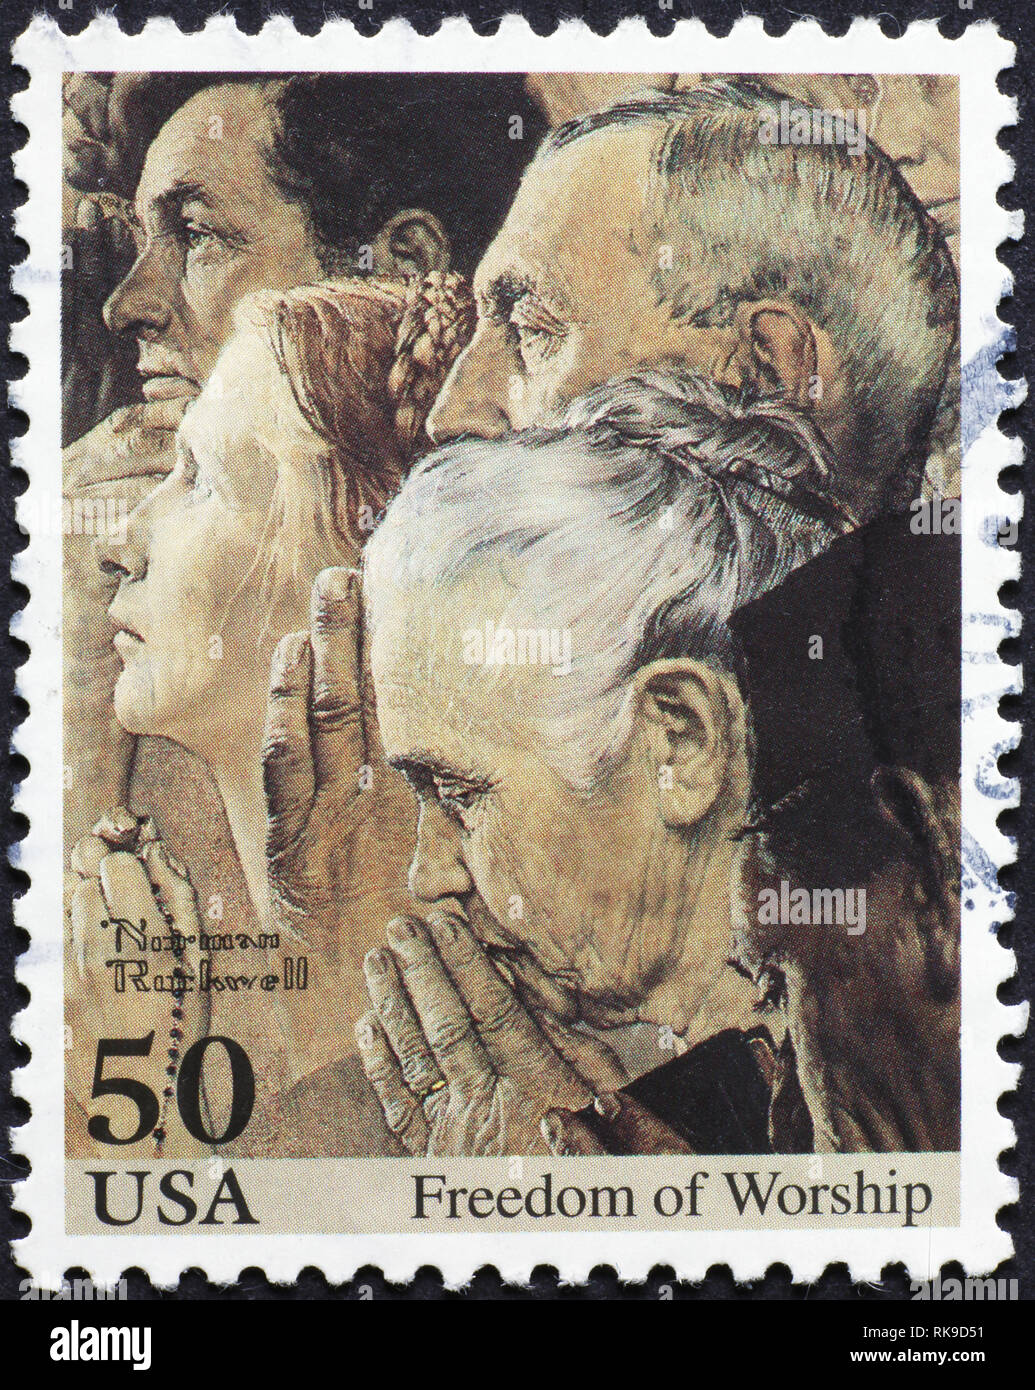 People praying by Norman Rockwell on american stamp Stock Photo